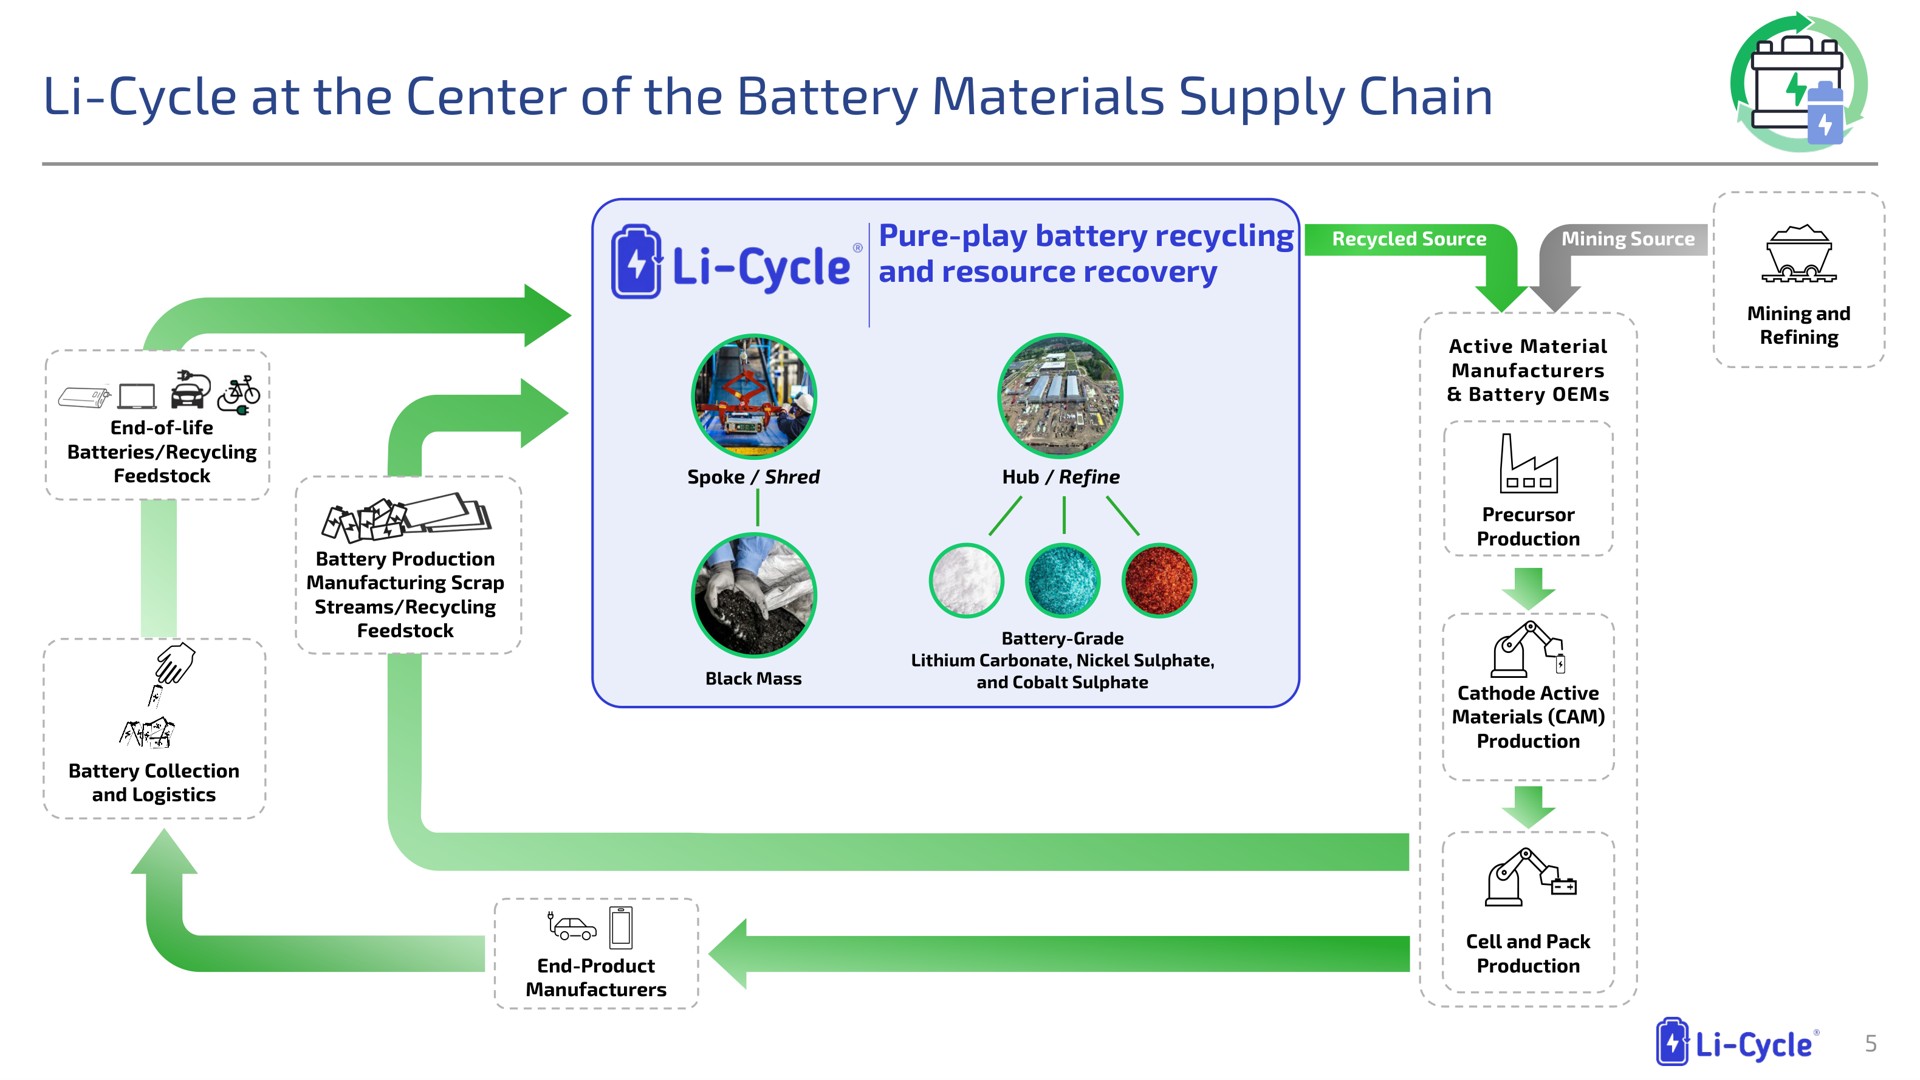 cycle at the center of the battery materials supply chain | Li-Cycle